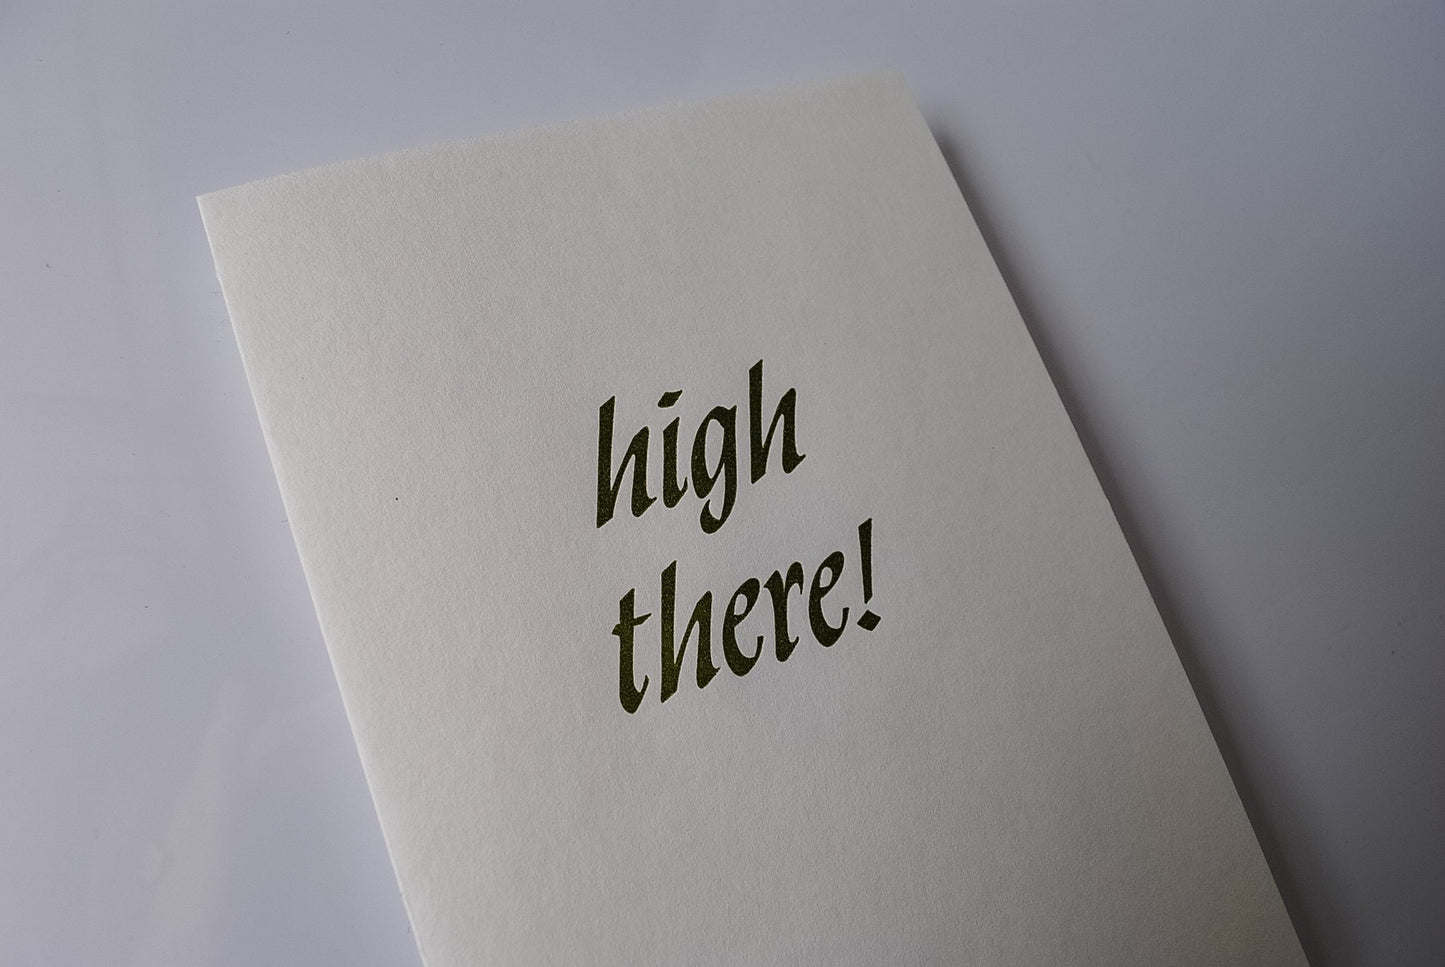 High There! Letterpress on Hemp Paper Greeting Card